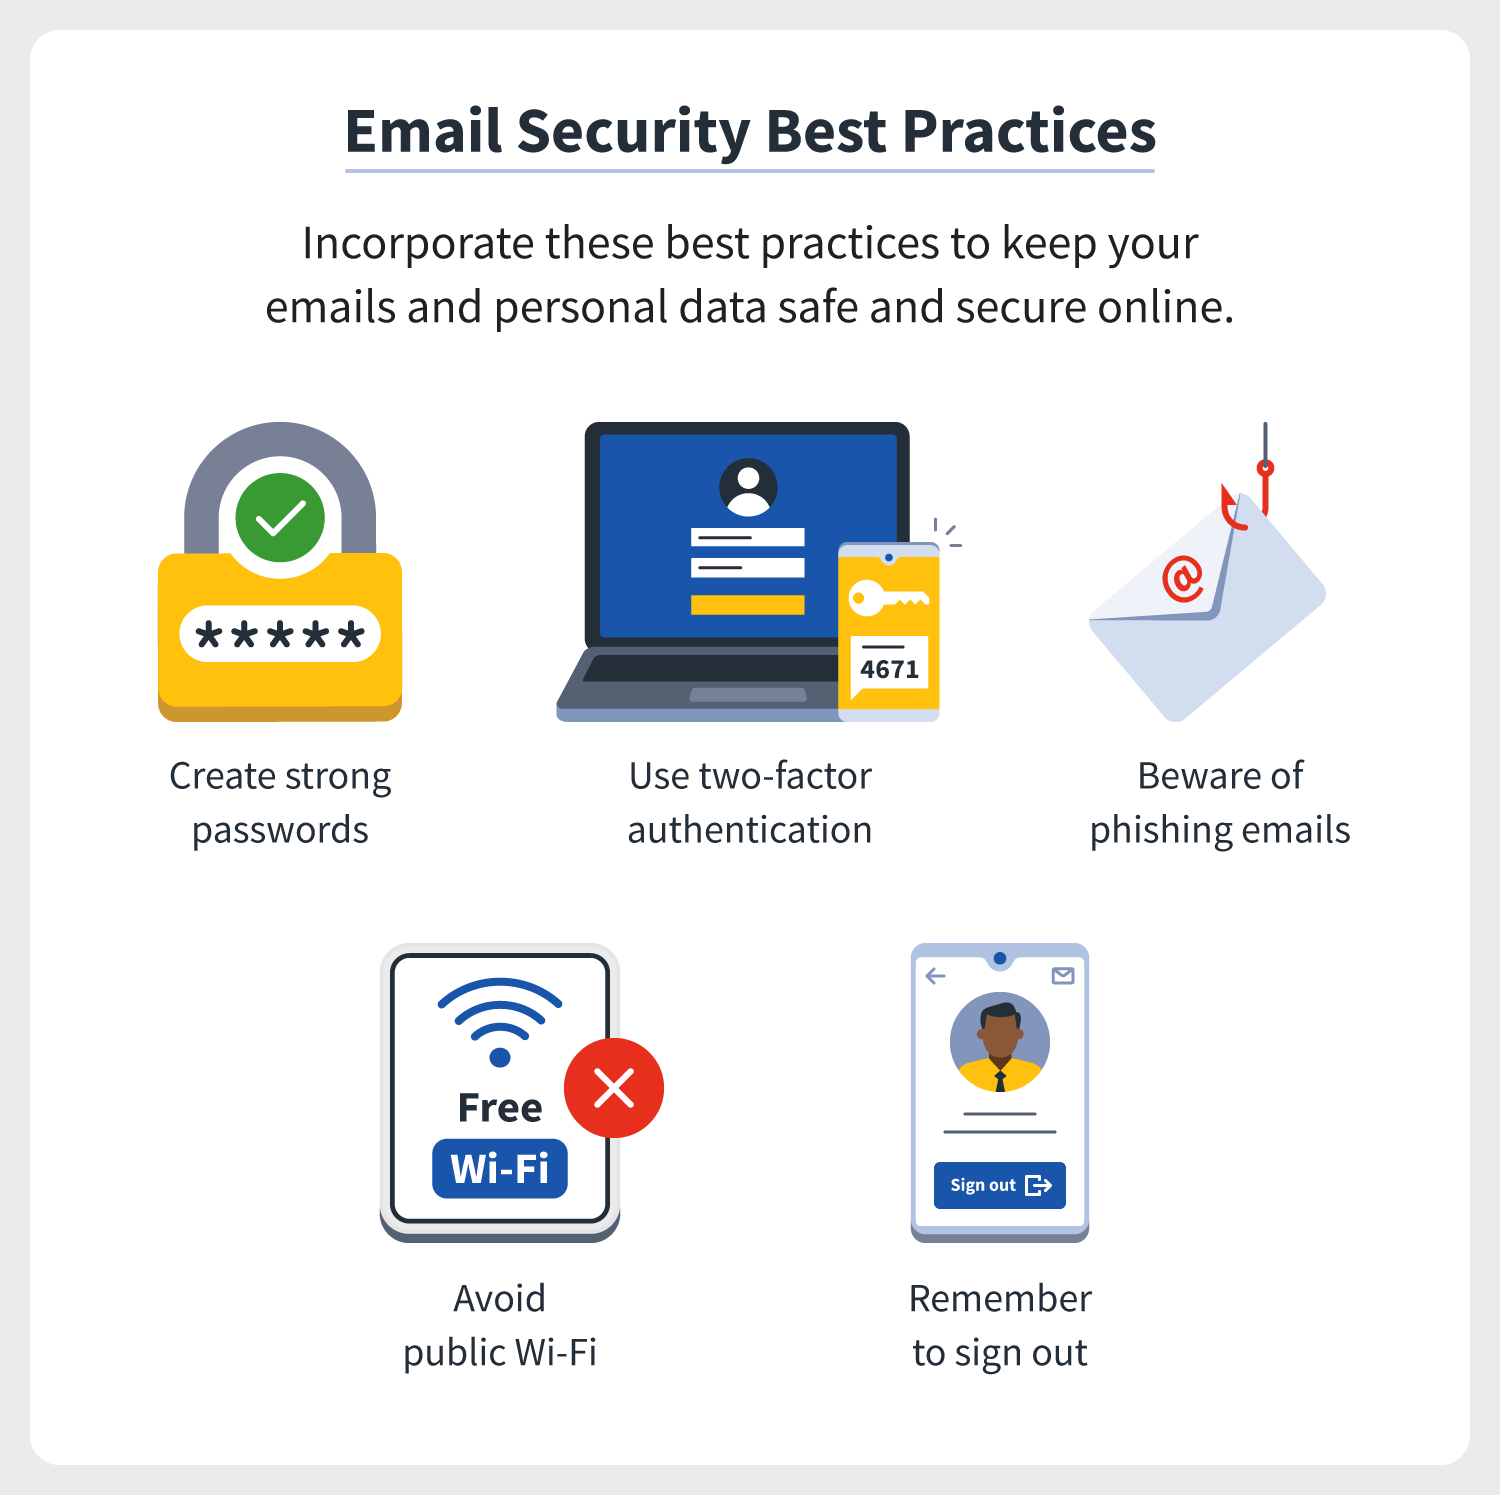 Five illustrations accompany email security best practices to keep in mind as you learn how to encrypt email messages on your devices.